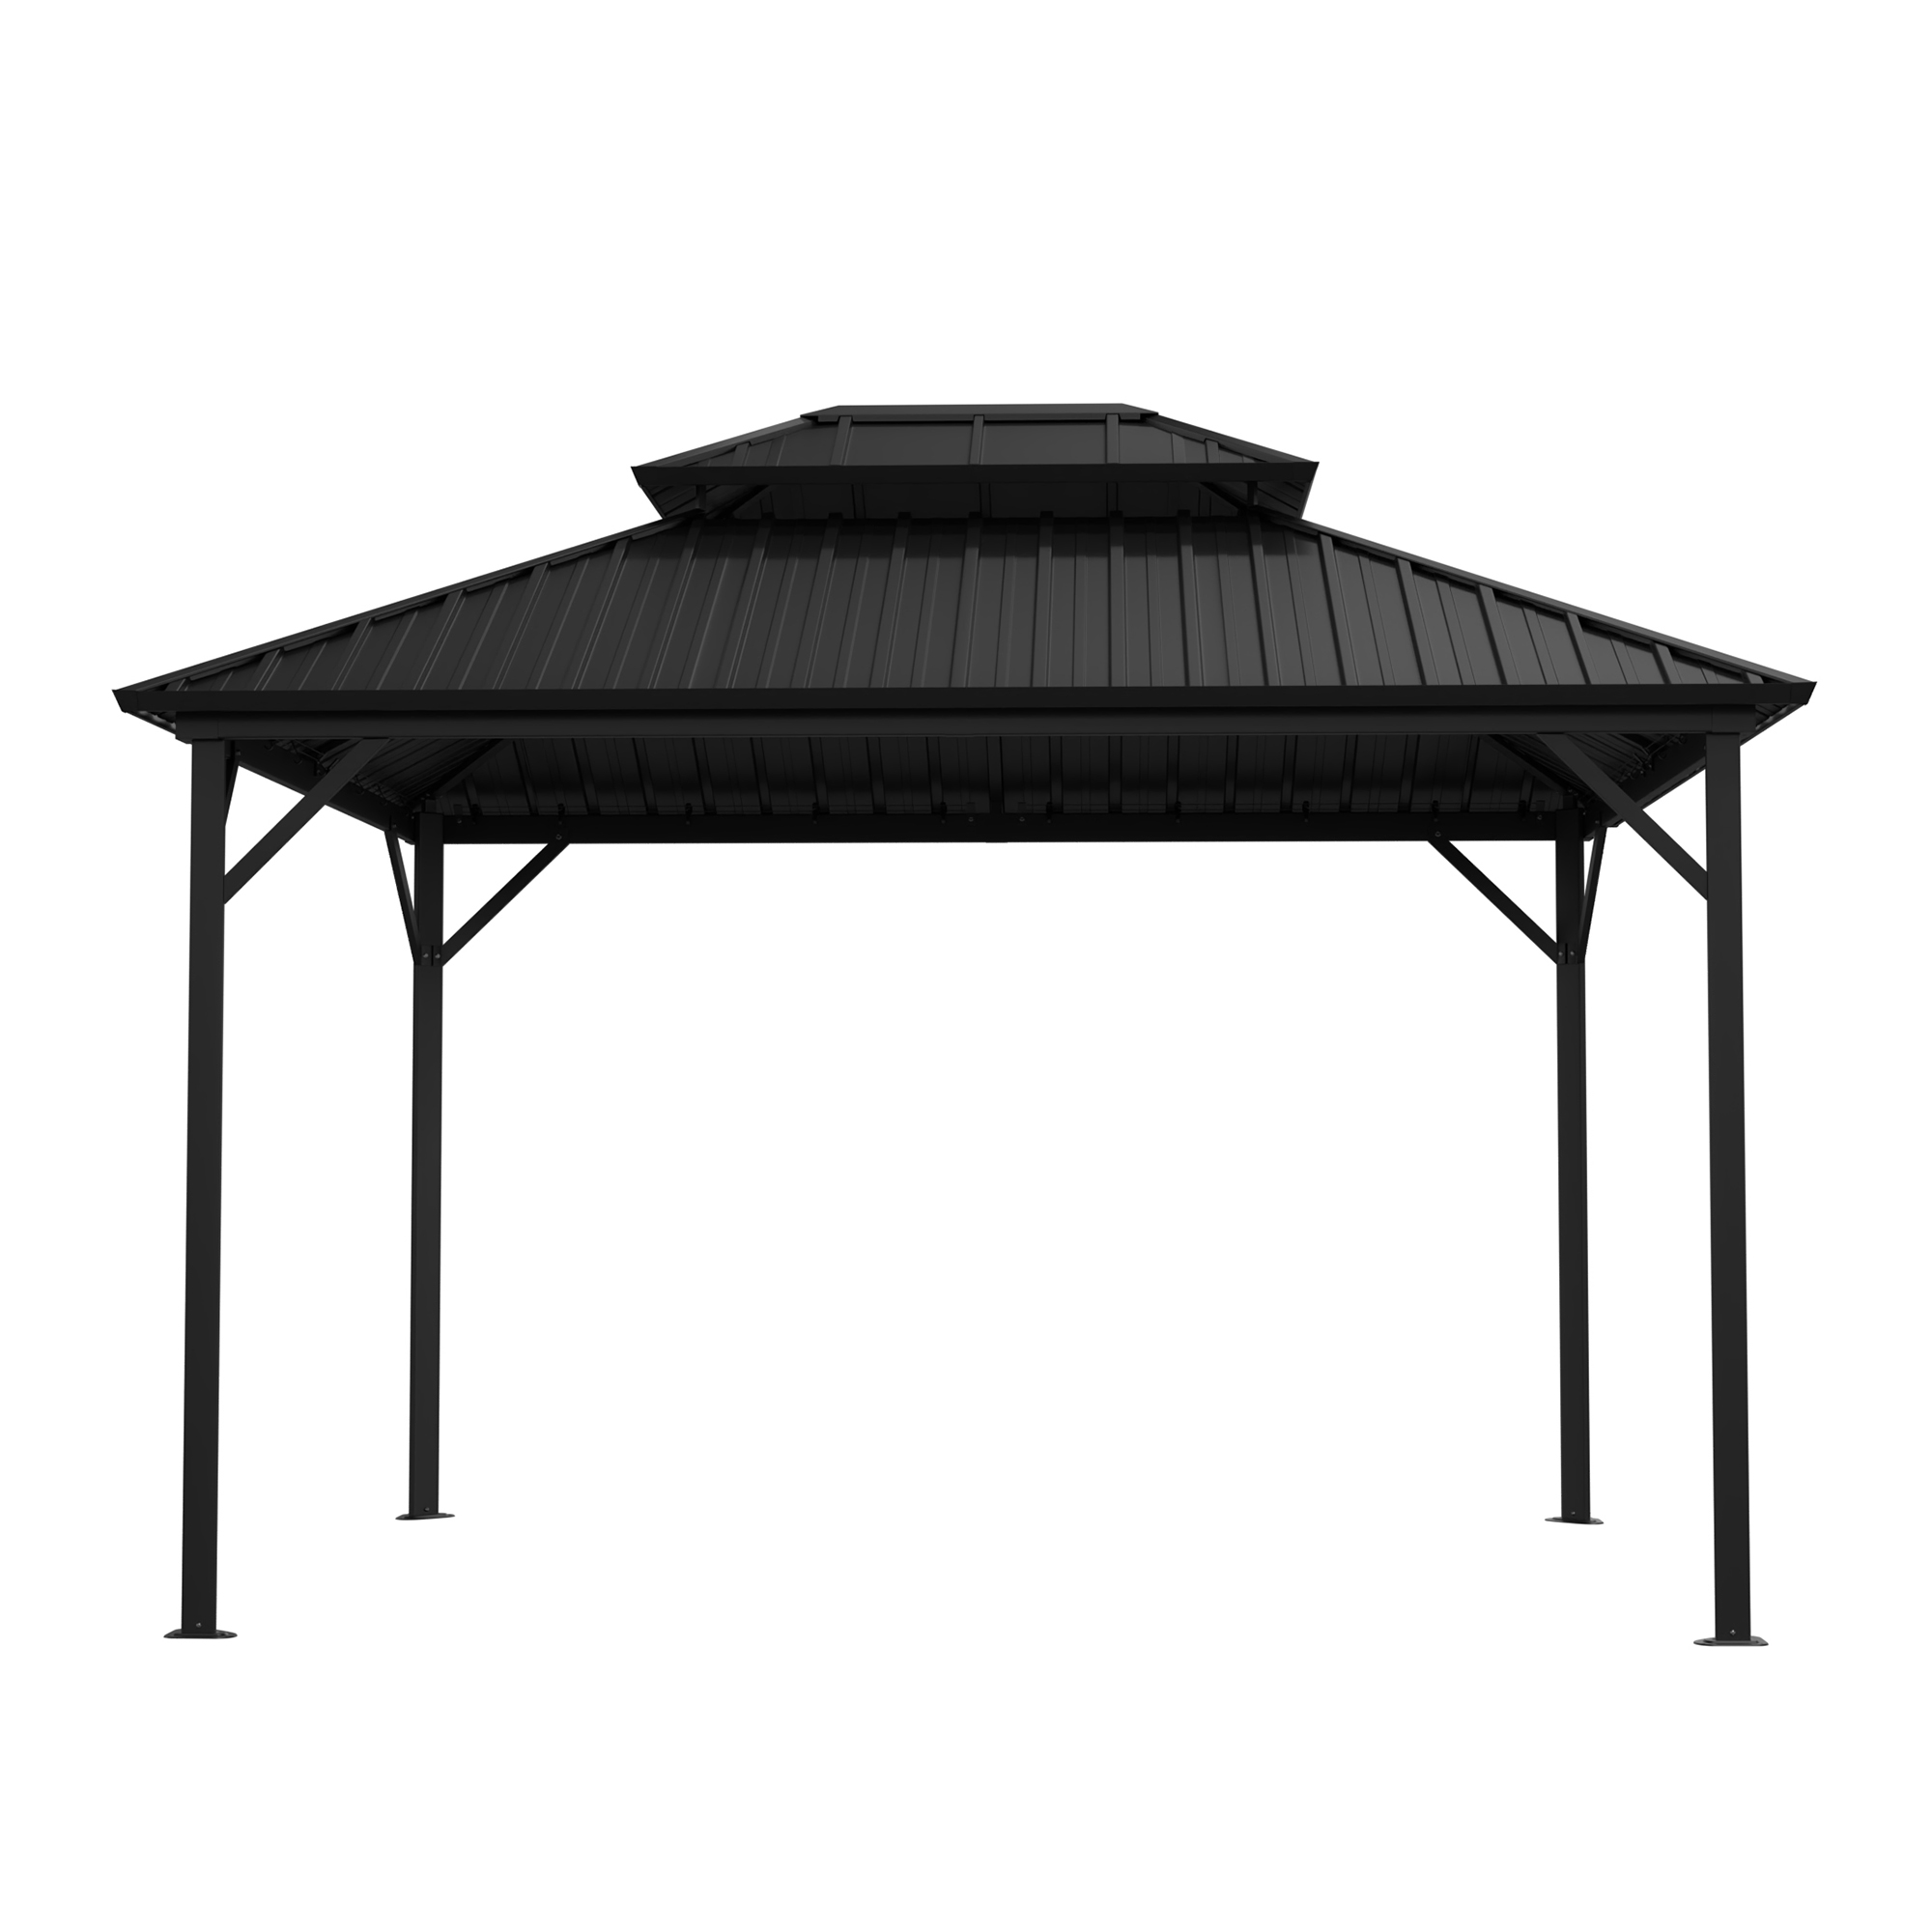 10 ft. x 12 ft. Outdoor Steel Frame Patio Gazebo Canopy Tent Shelter with Galvanized Steel Hardtop Roof Pavilion Garden-Mondawe